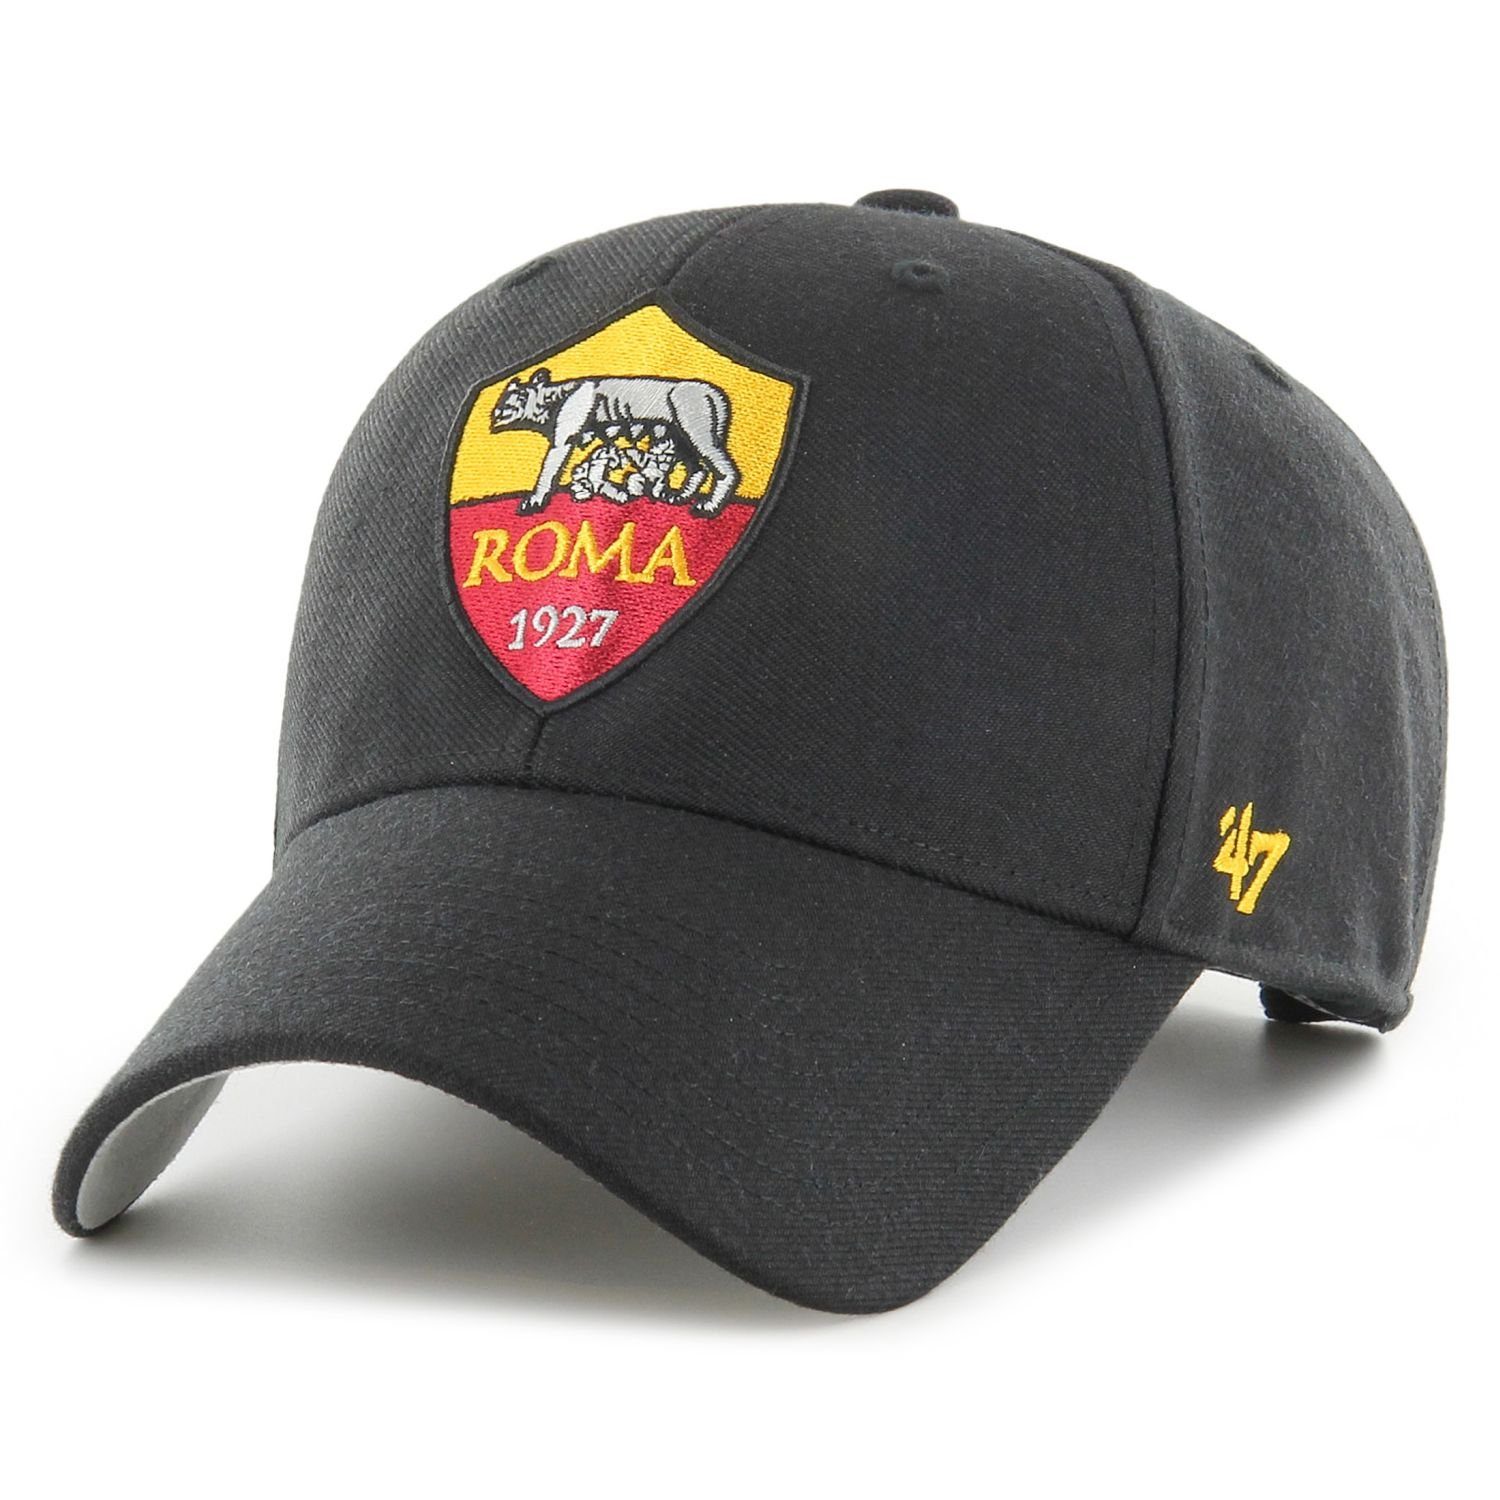 Relaxed '47 Roma Brand Baseball Cap Fit AS